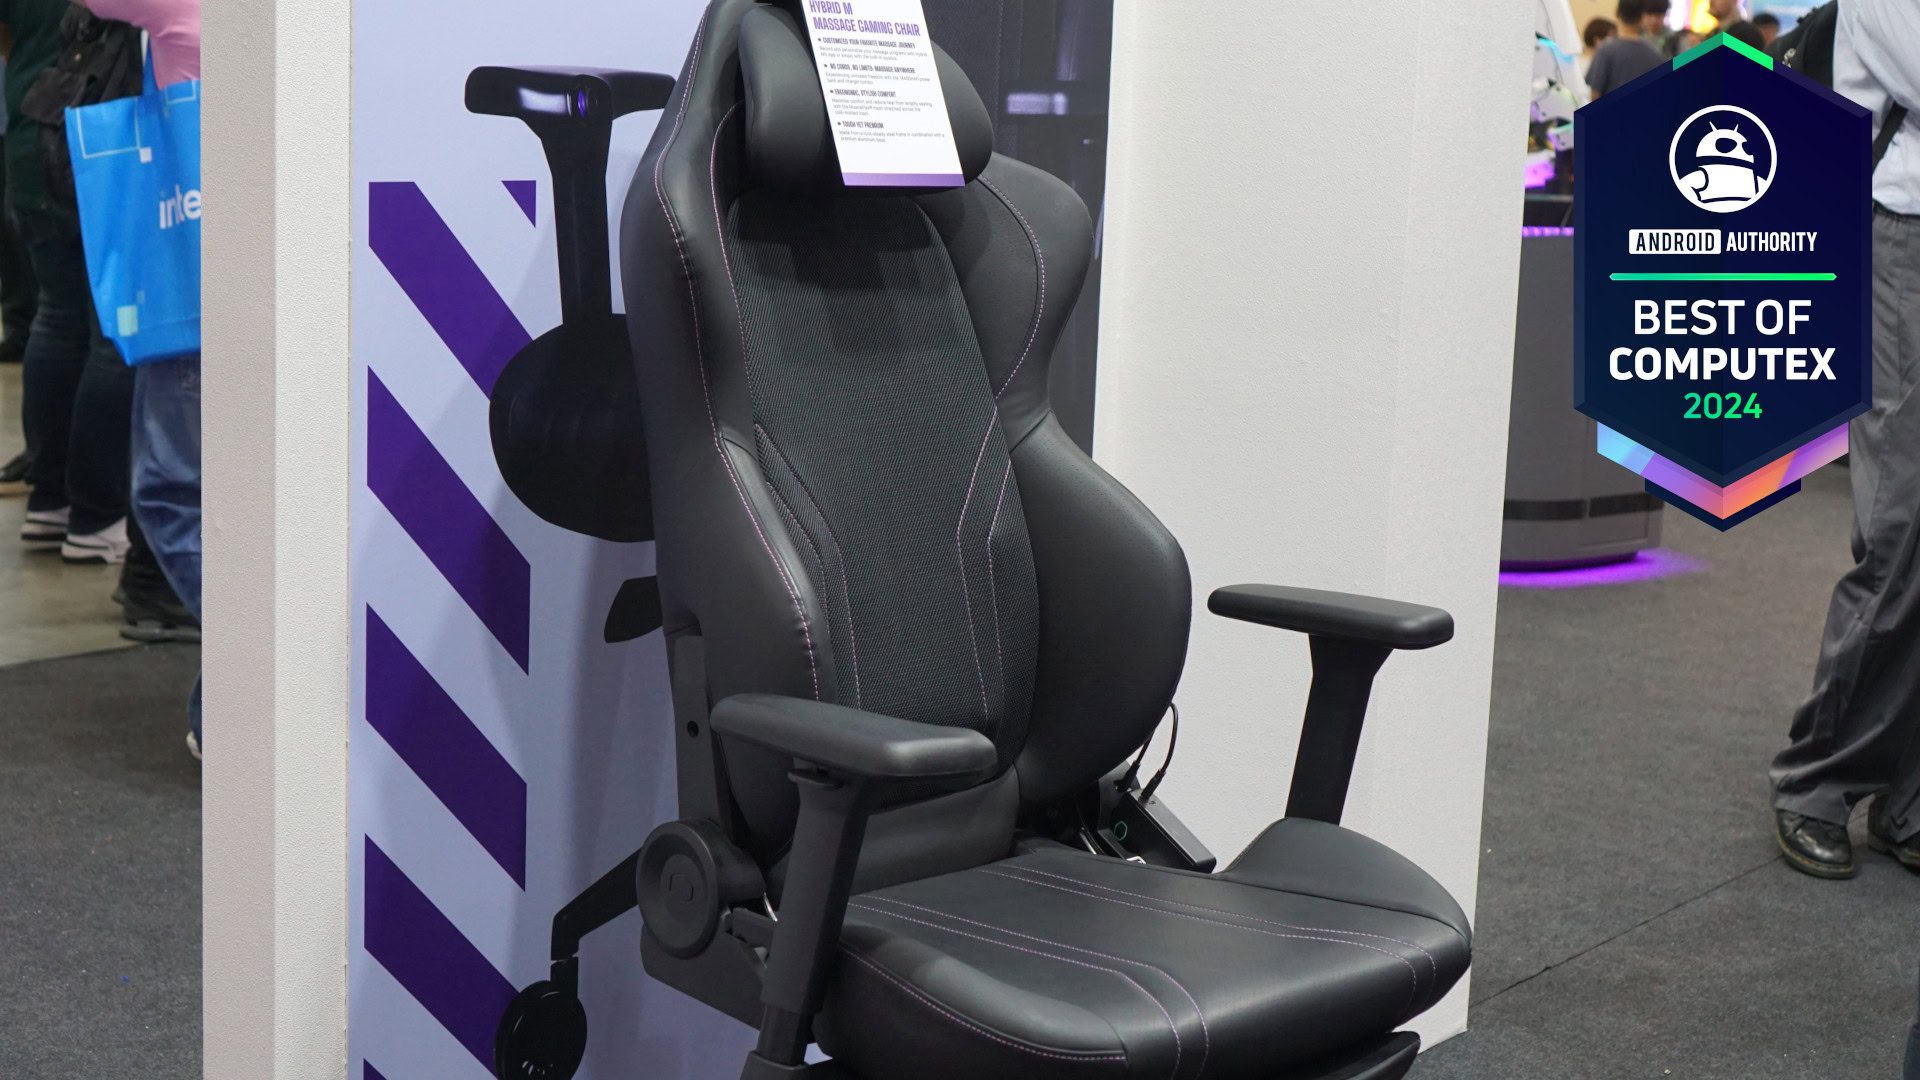 The Coolermaster Massage Gaming Chair at Computex.